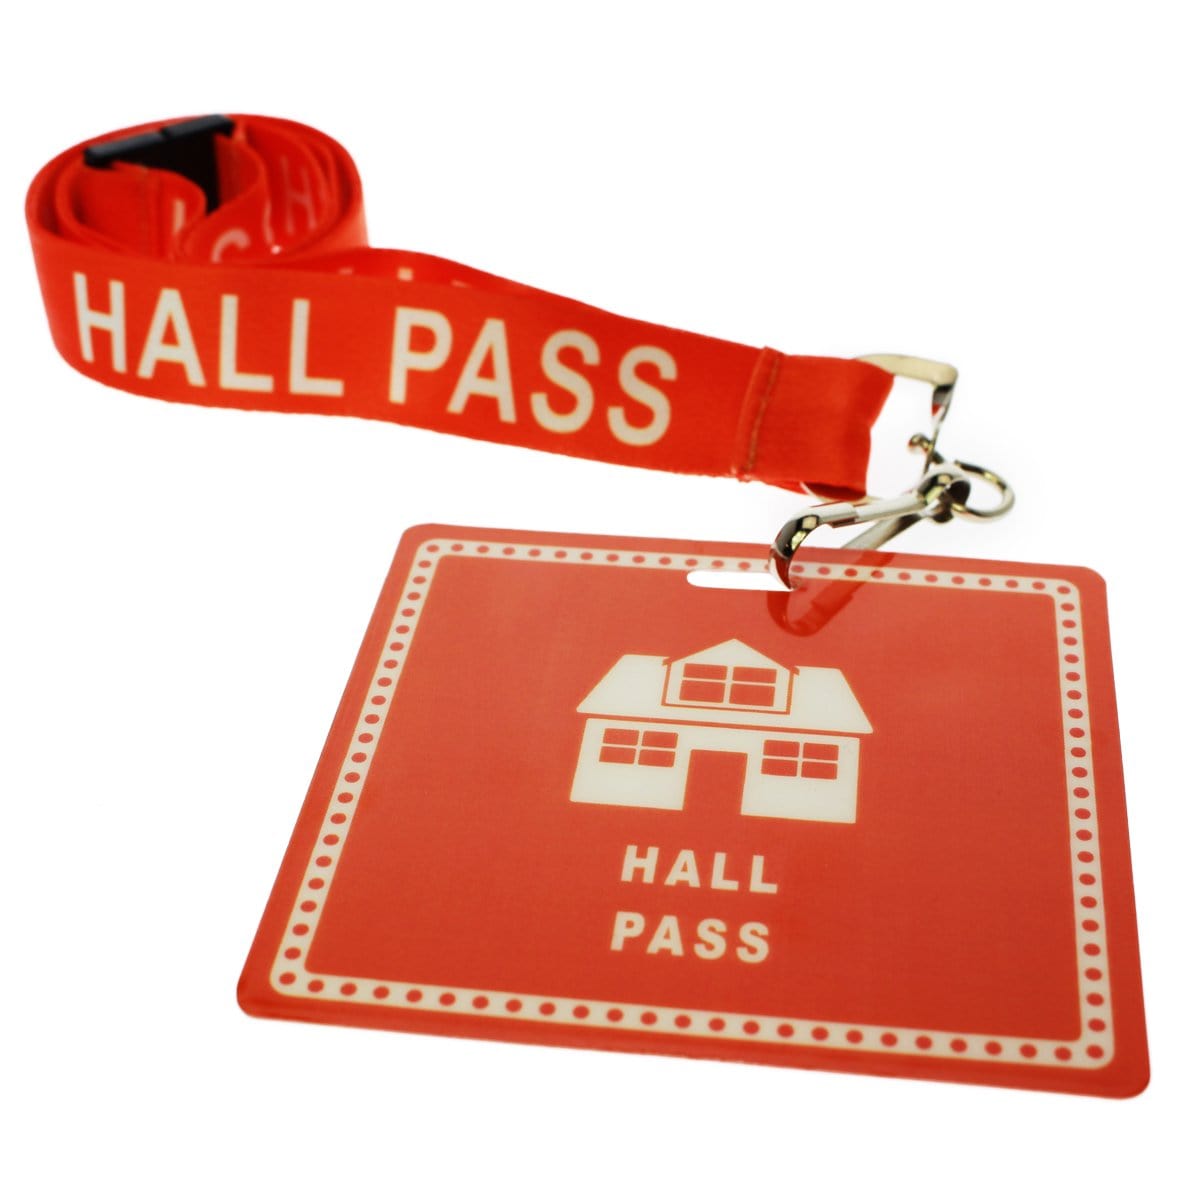 Red School Hall Pass Lanyards WITH UNBREAKABLE CARD PASSES (SPID-9800) with a house icon on a safety breakaway lanyard featuring repeated "HALL PASS" text and made from durable, waterproof laminated passes.